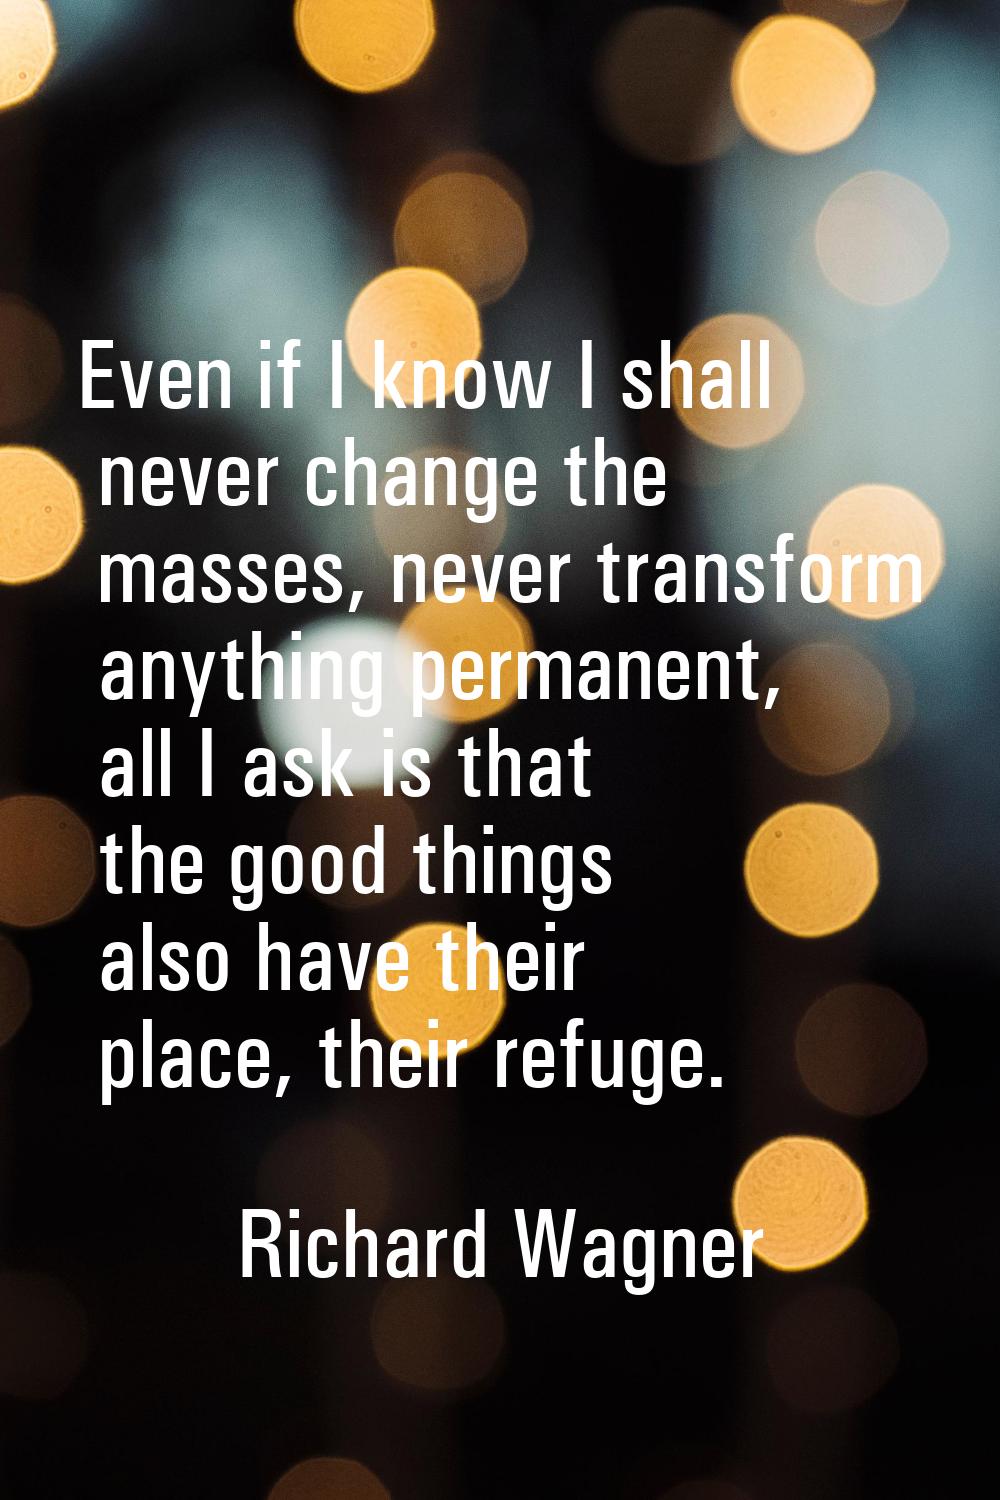 Even if I know I shall never change the masses, never transform anything permanent, all I ask is th